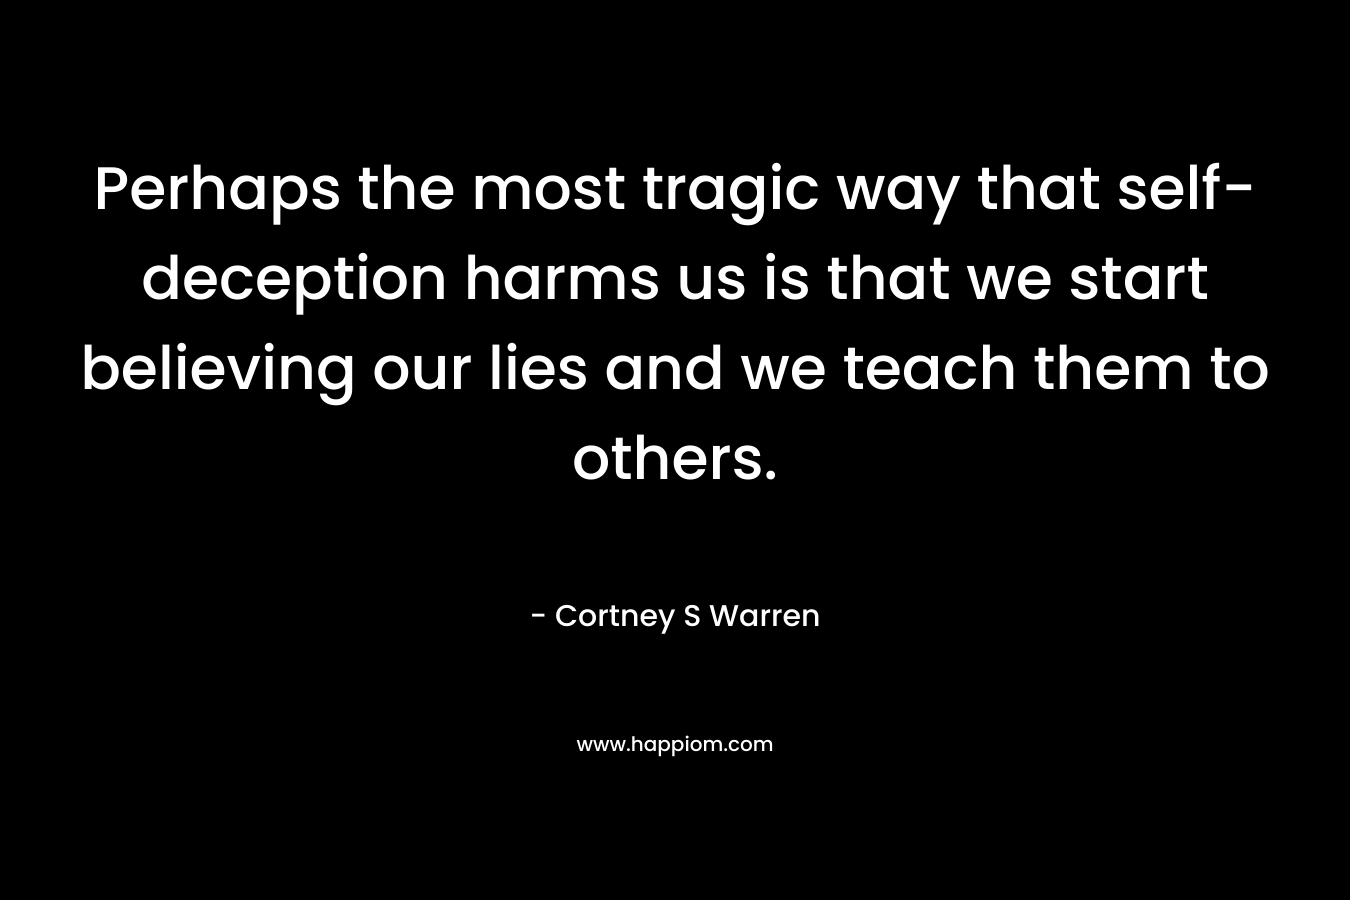 Perhaps the most tragic way that self-deception harms us is that we start believing our lies and we teach them to others.